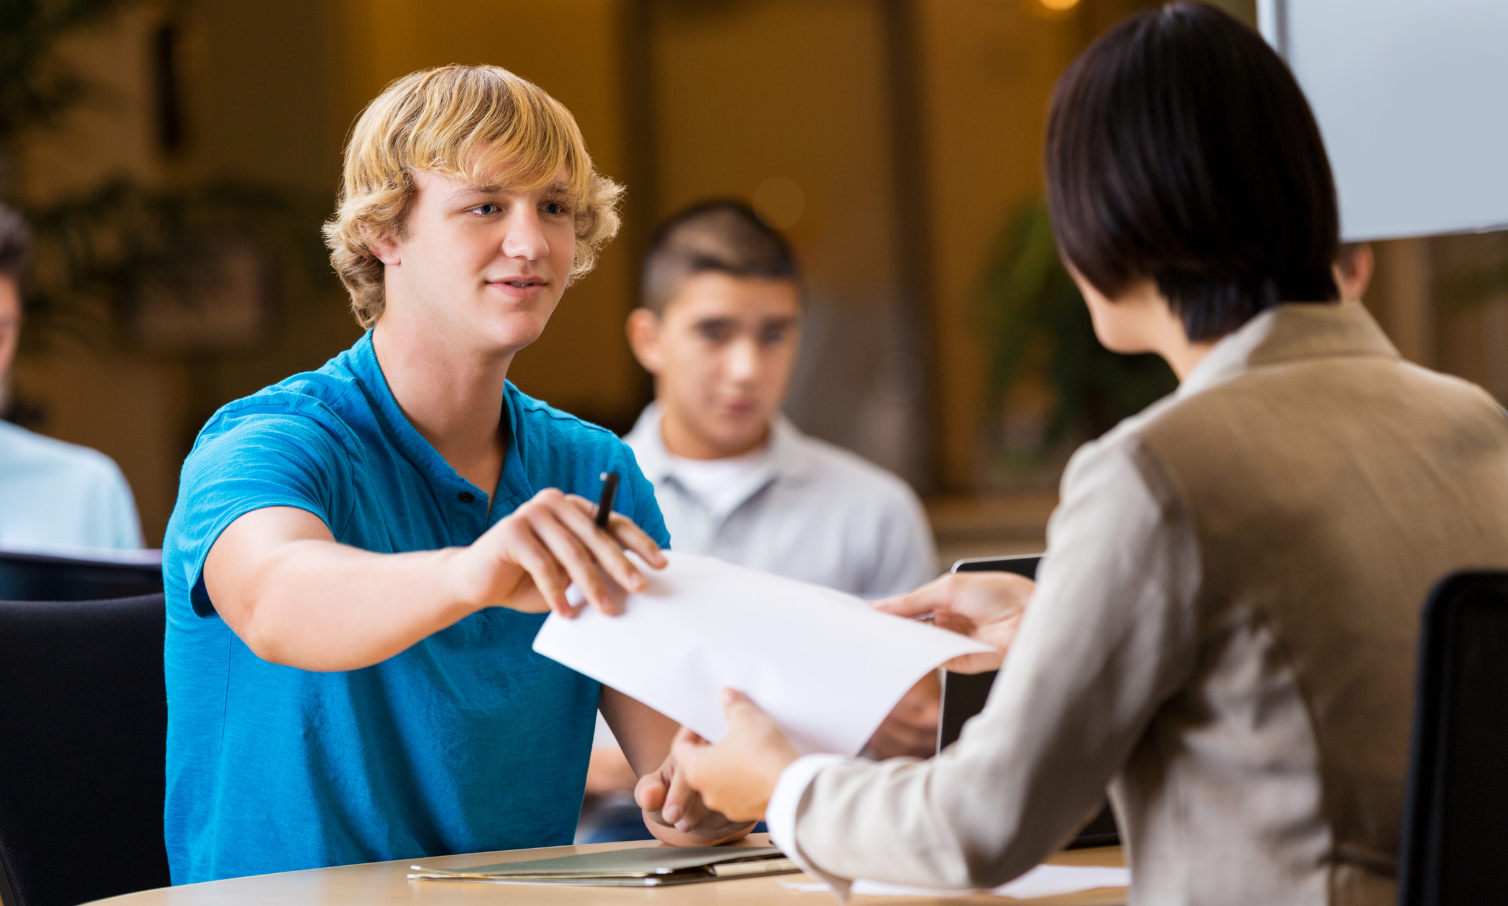 A picture of a young male handing a resume to someone.